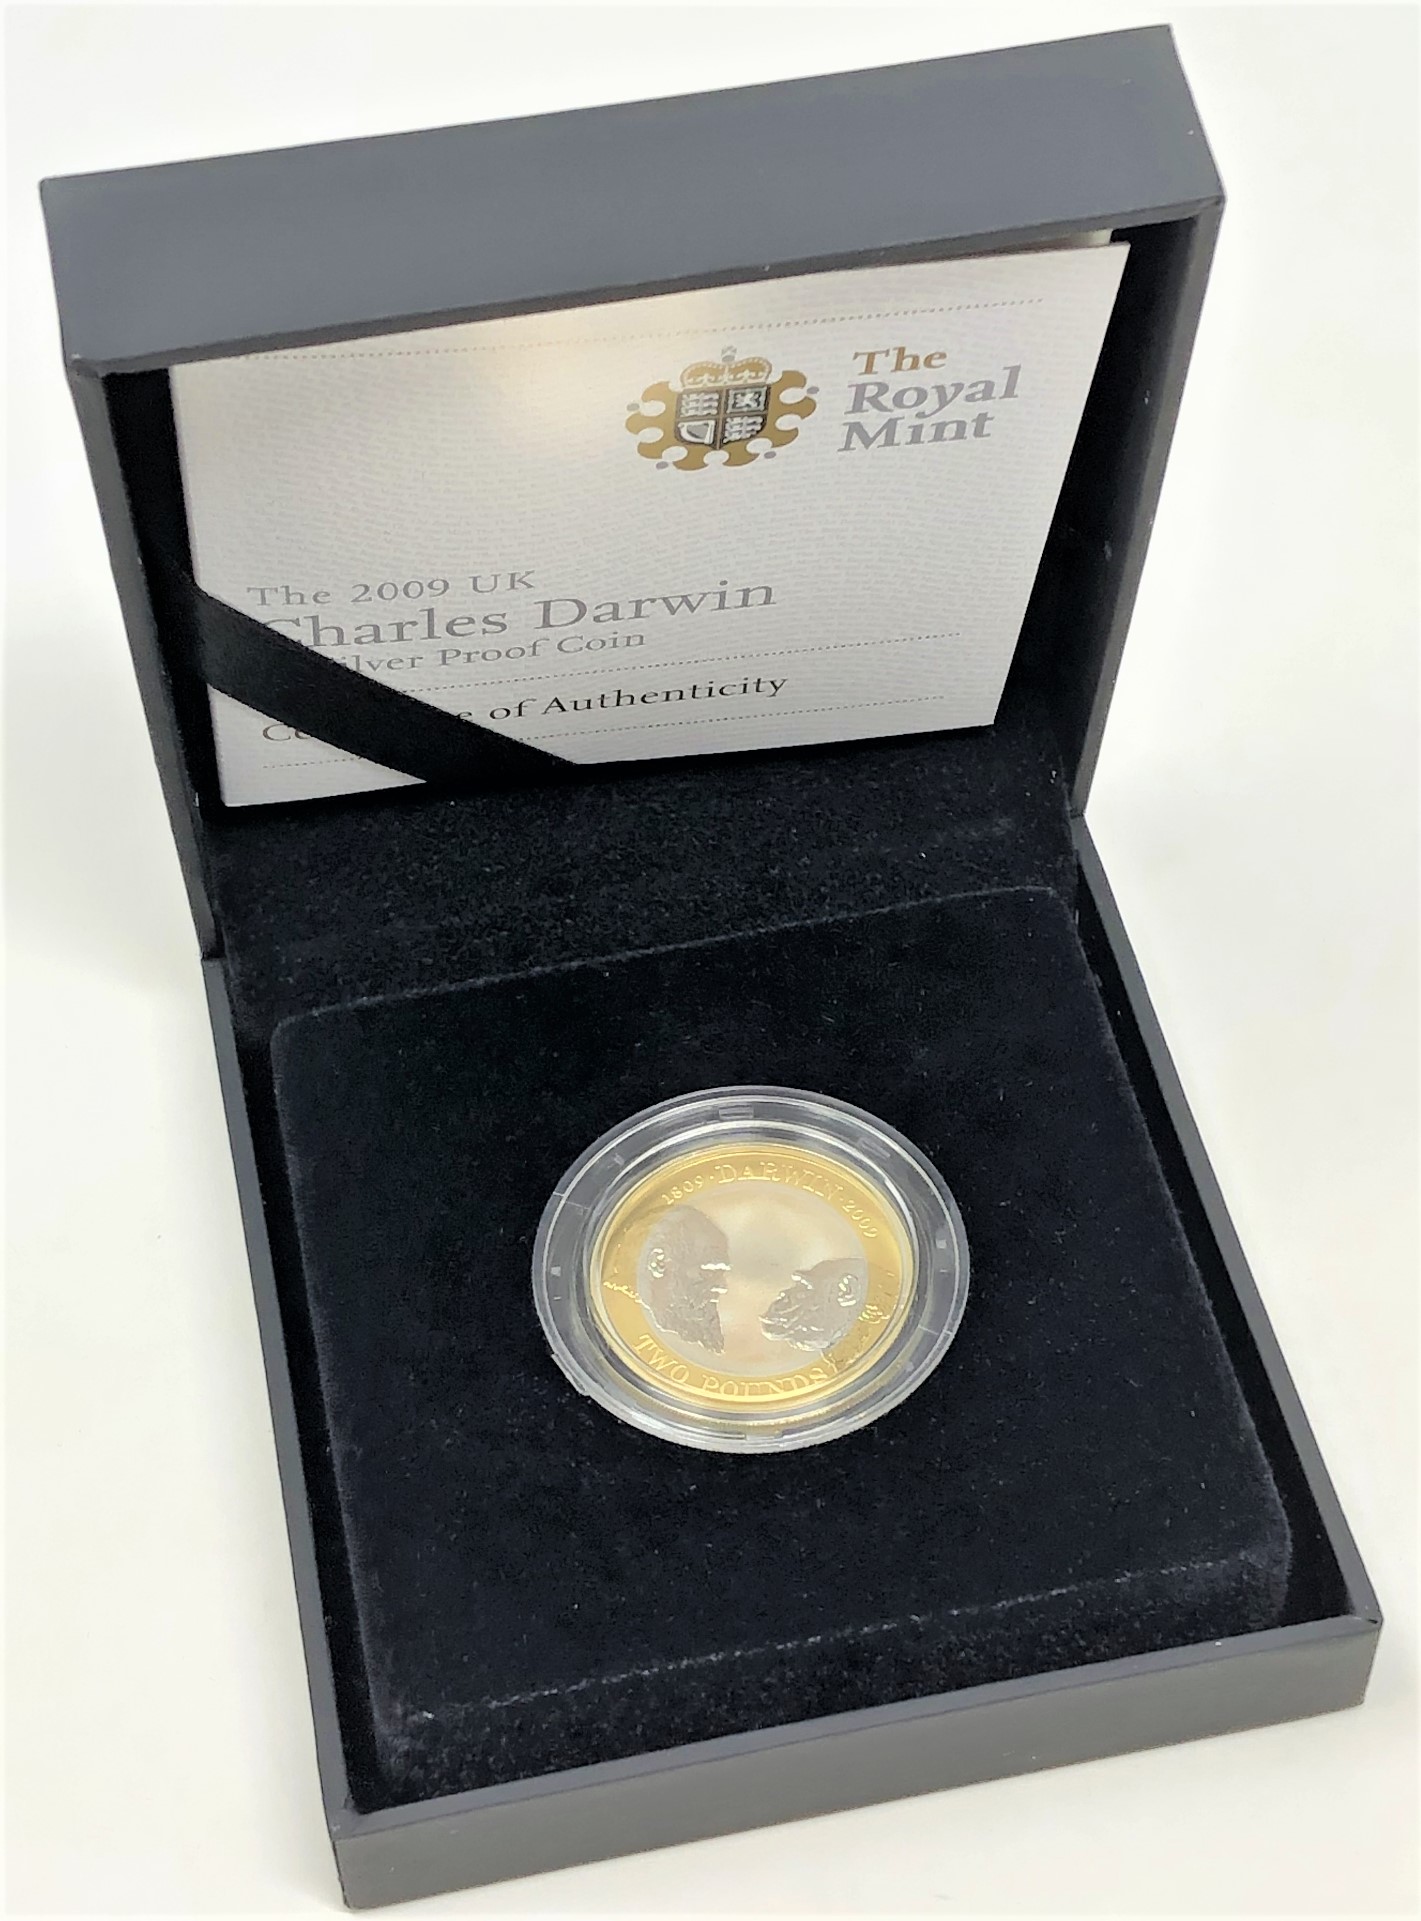 The Royal Mint - The 2009 Charles Darwin £2 silver proof coin, 12g.